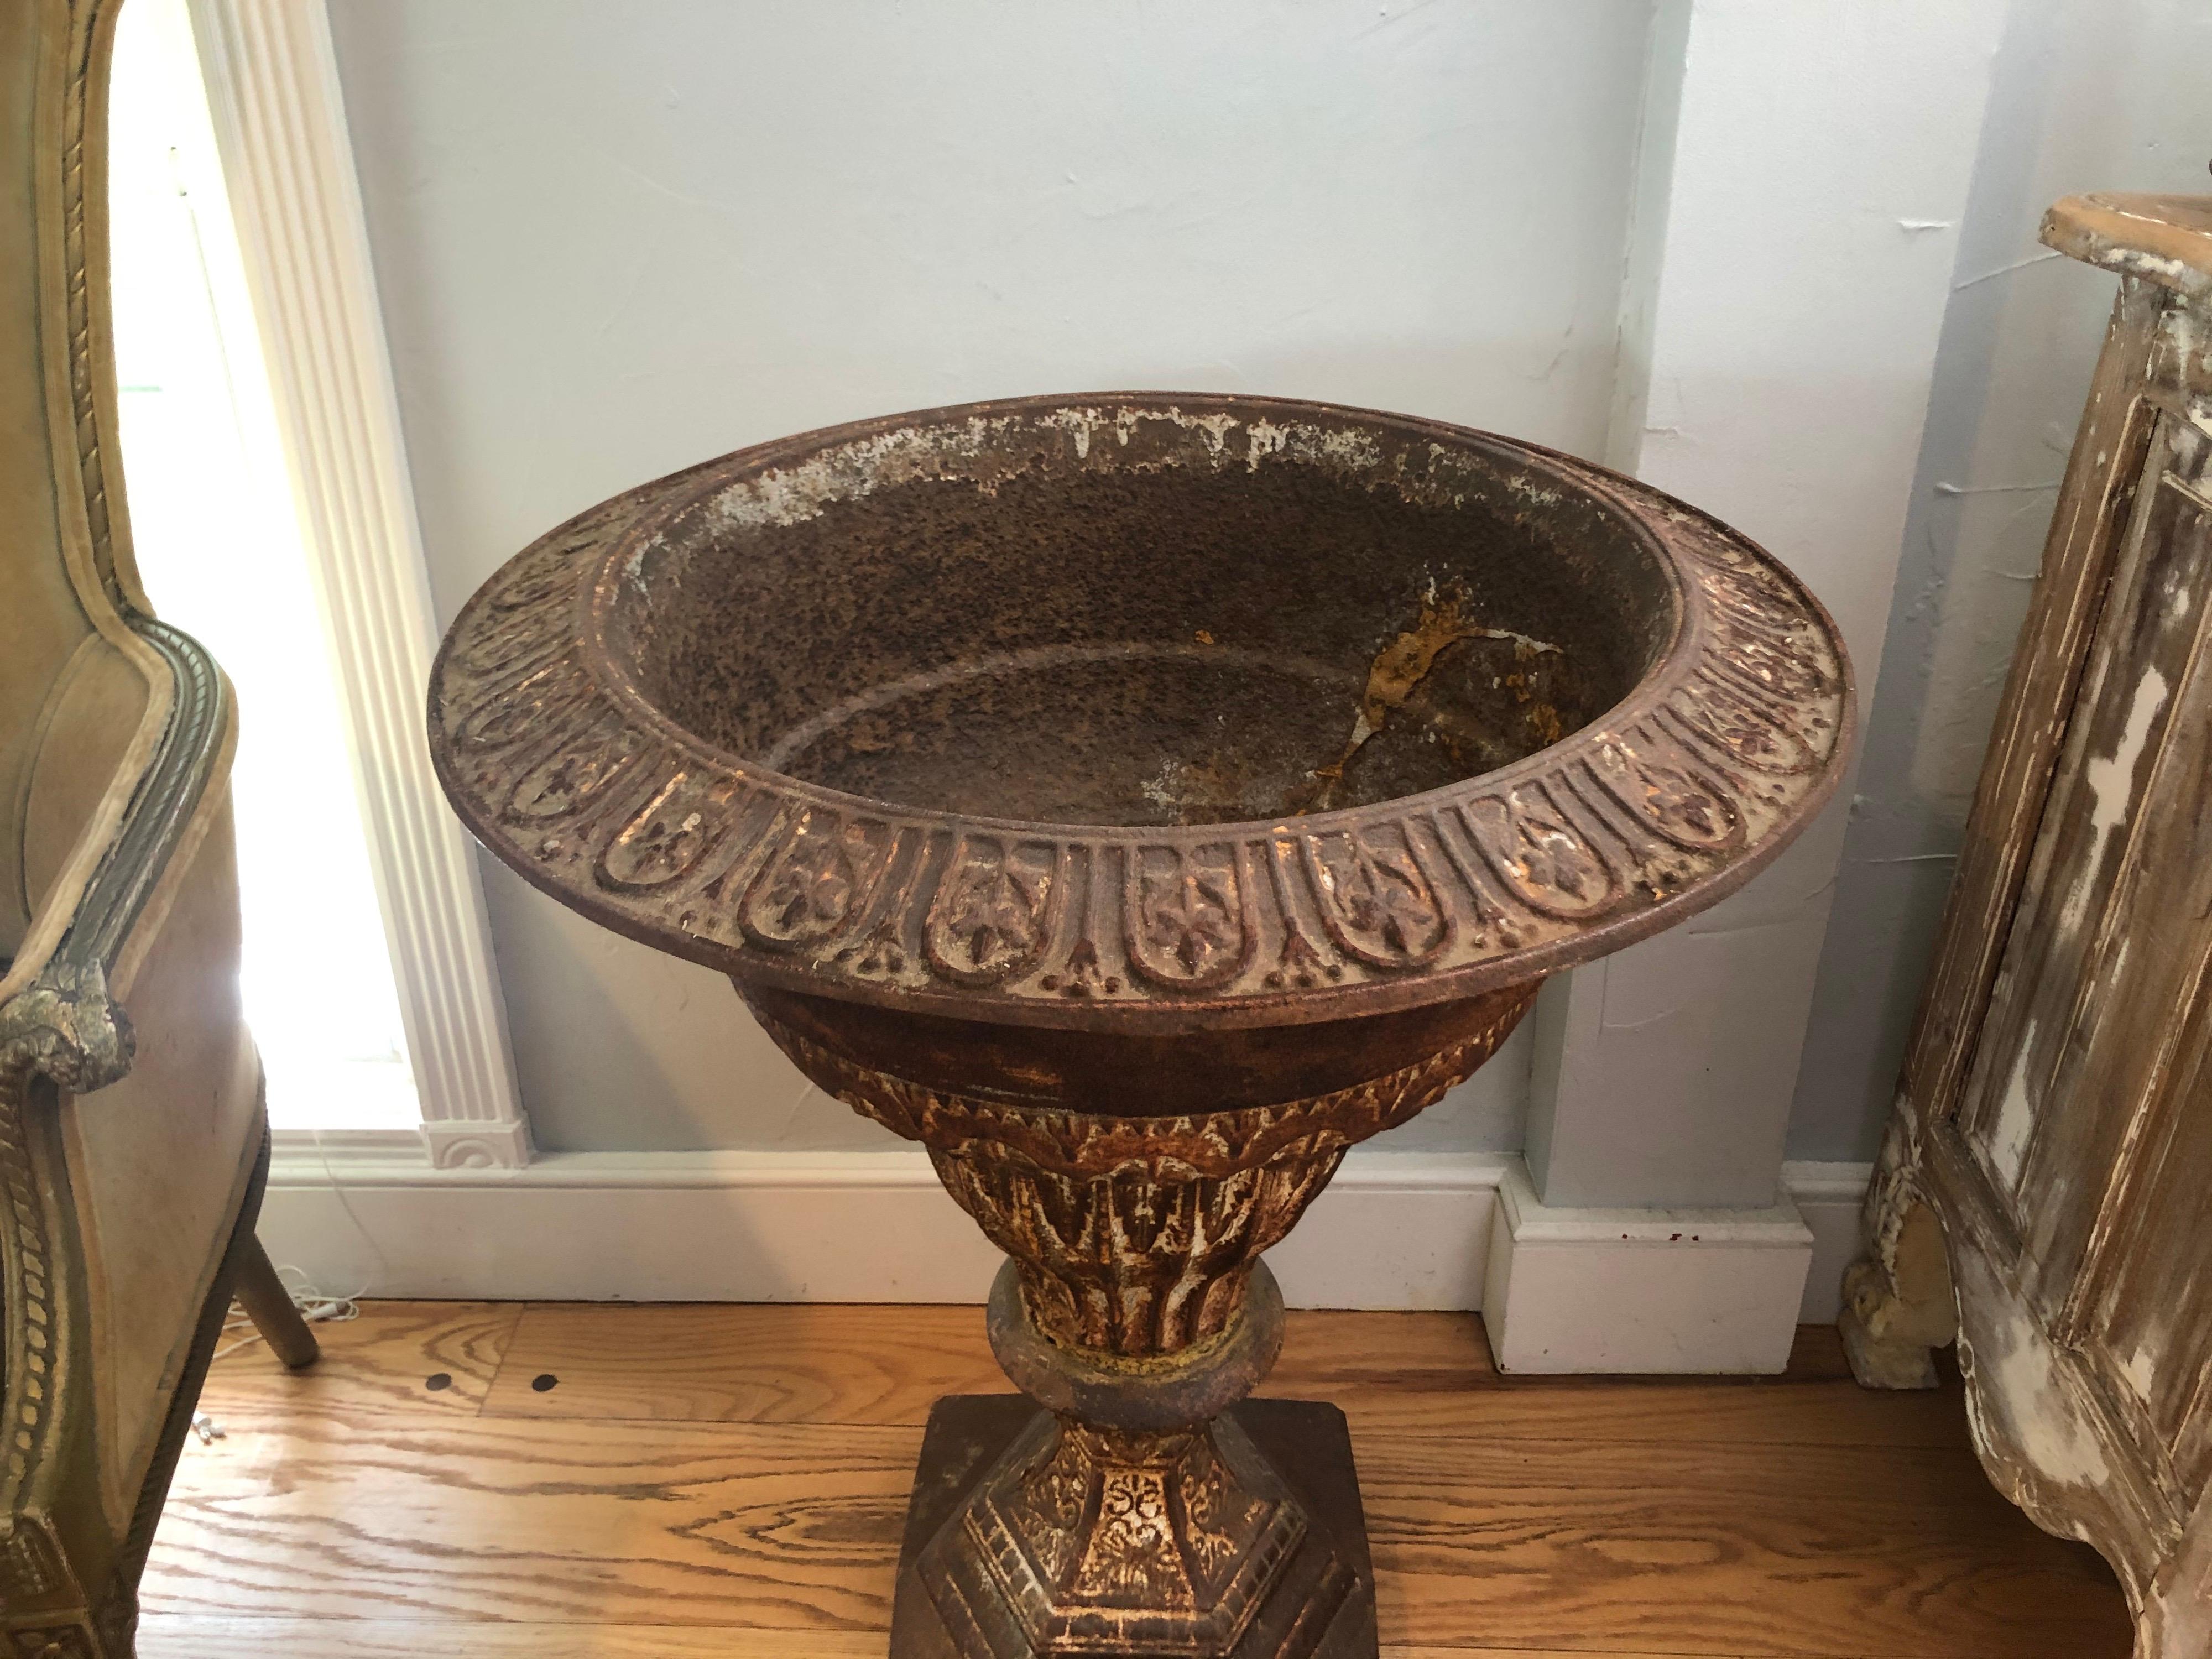 Late 19th Century Iron Garden Urn Attributed to J. W. Fiske In Good Condition For Sale In Redding, CT